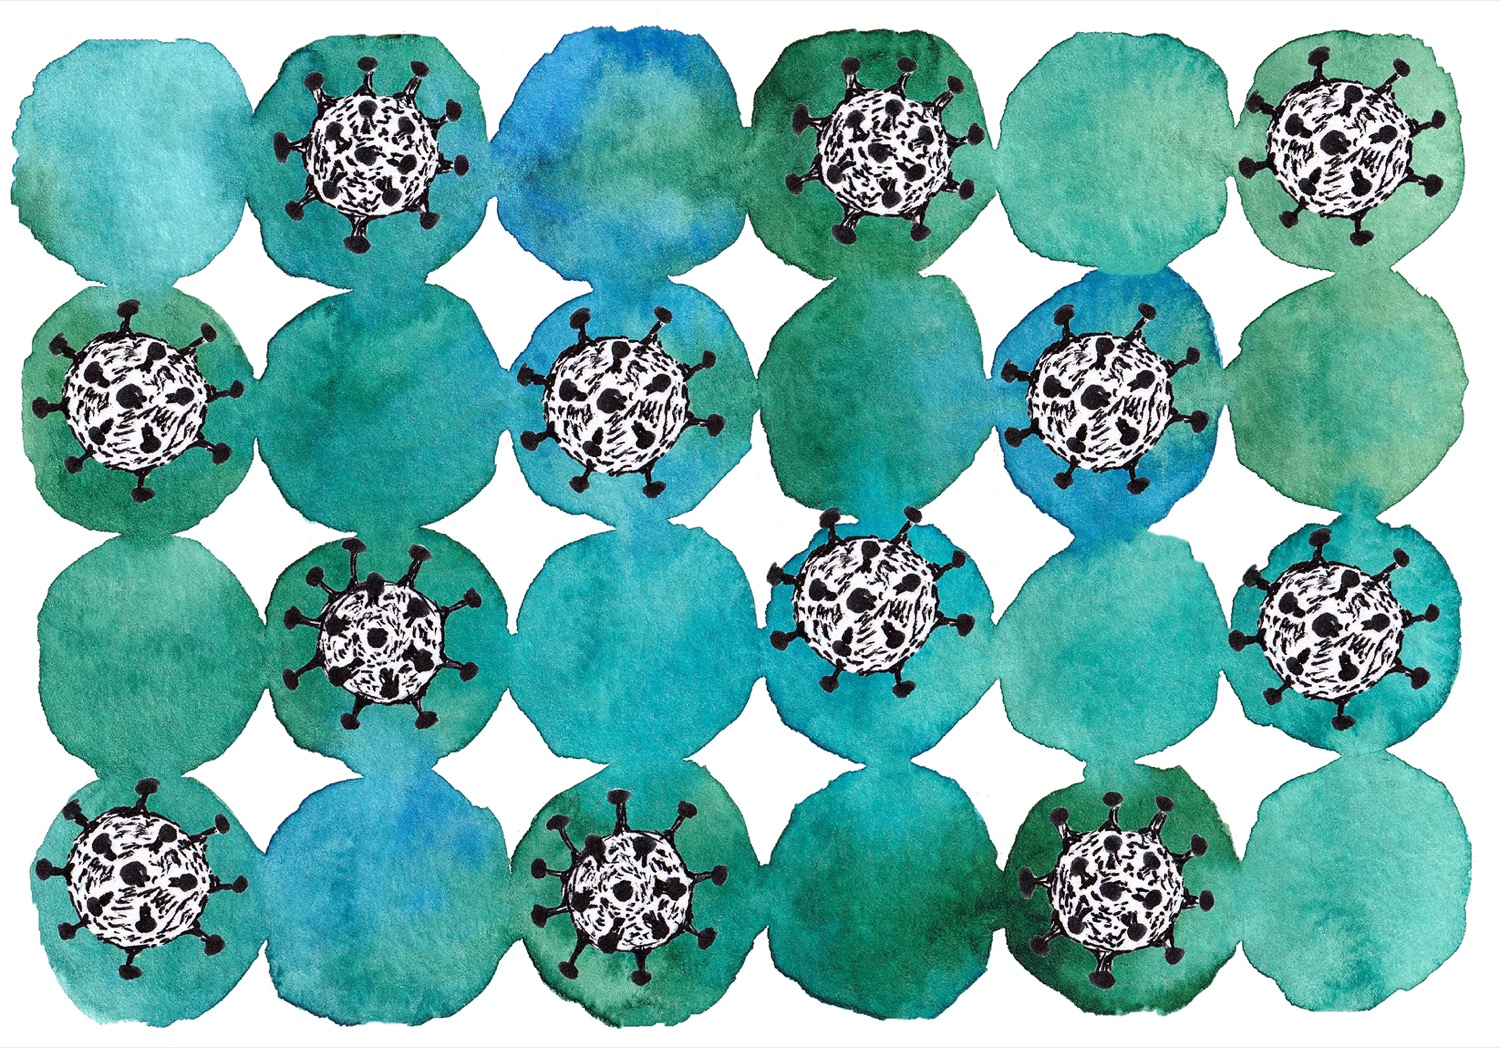 a simple watercolor painting featuring a 6x4 grid made up of turquoise circles. inside every other circle is a covid virus particle